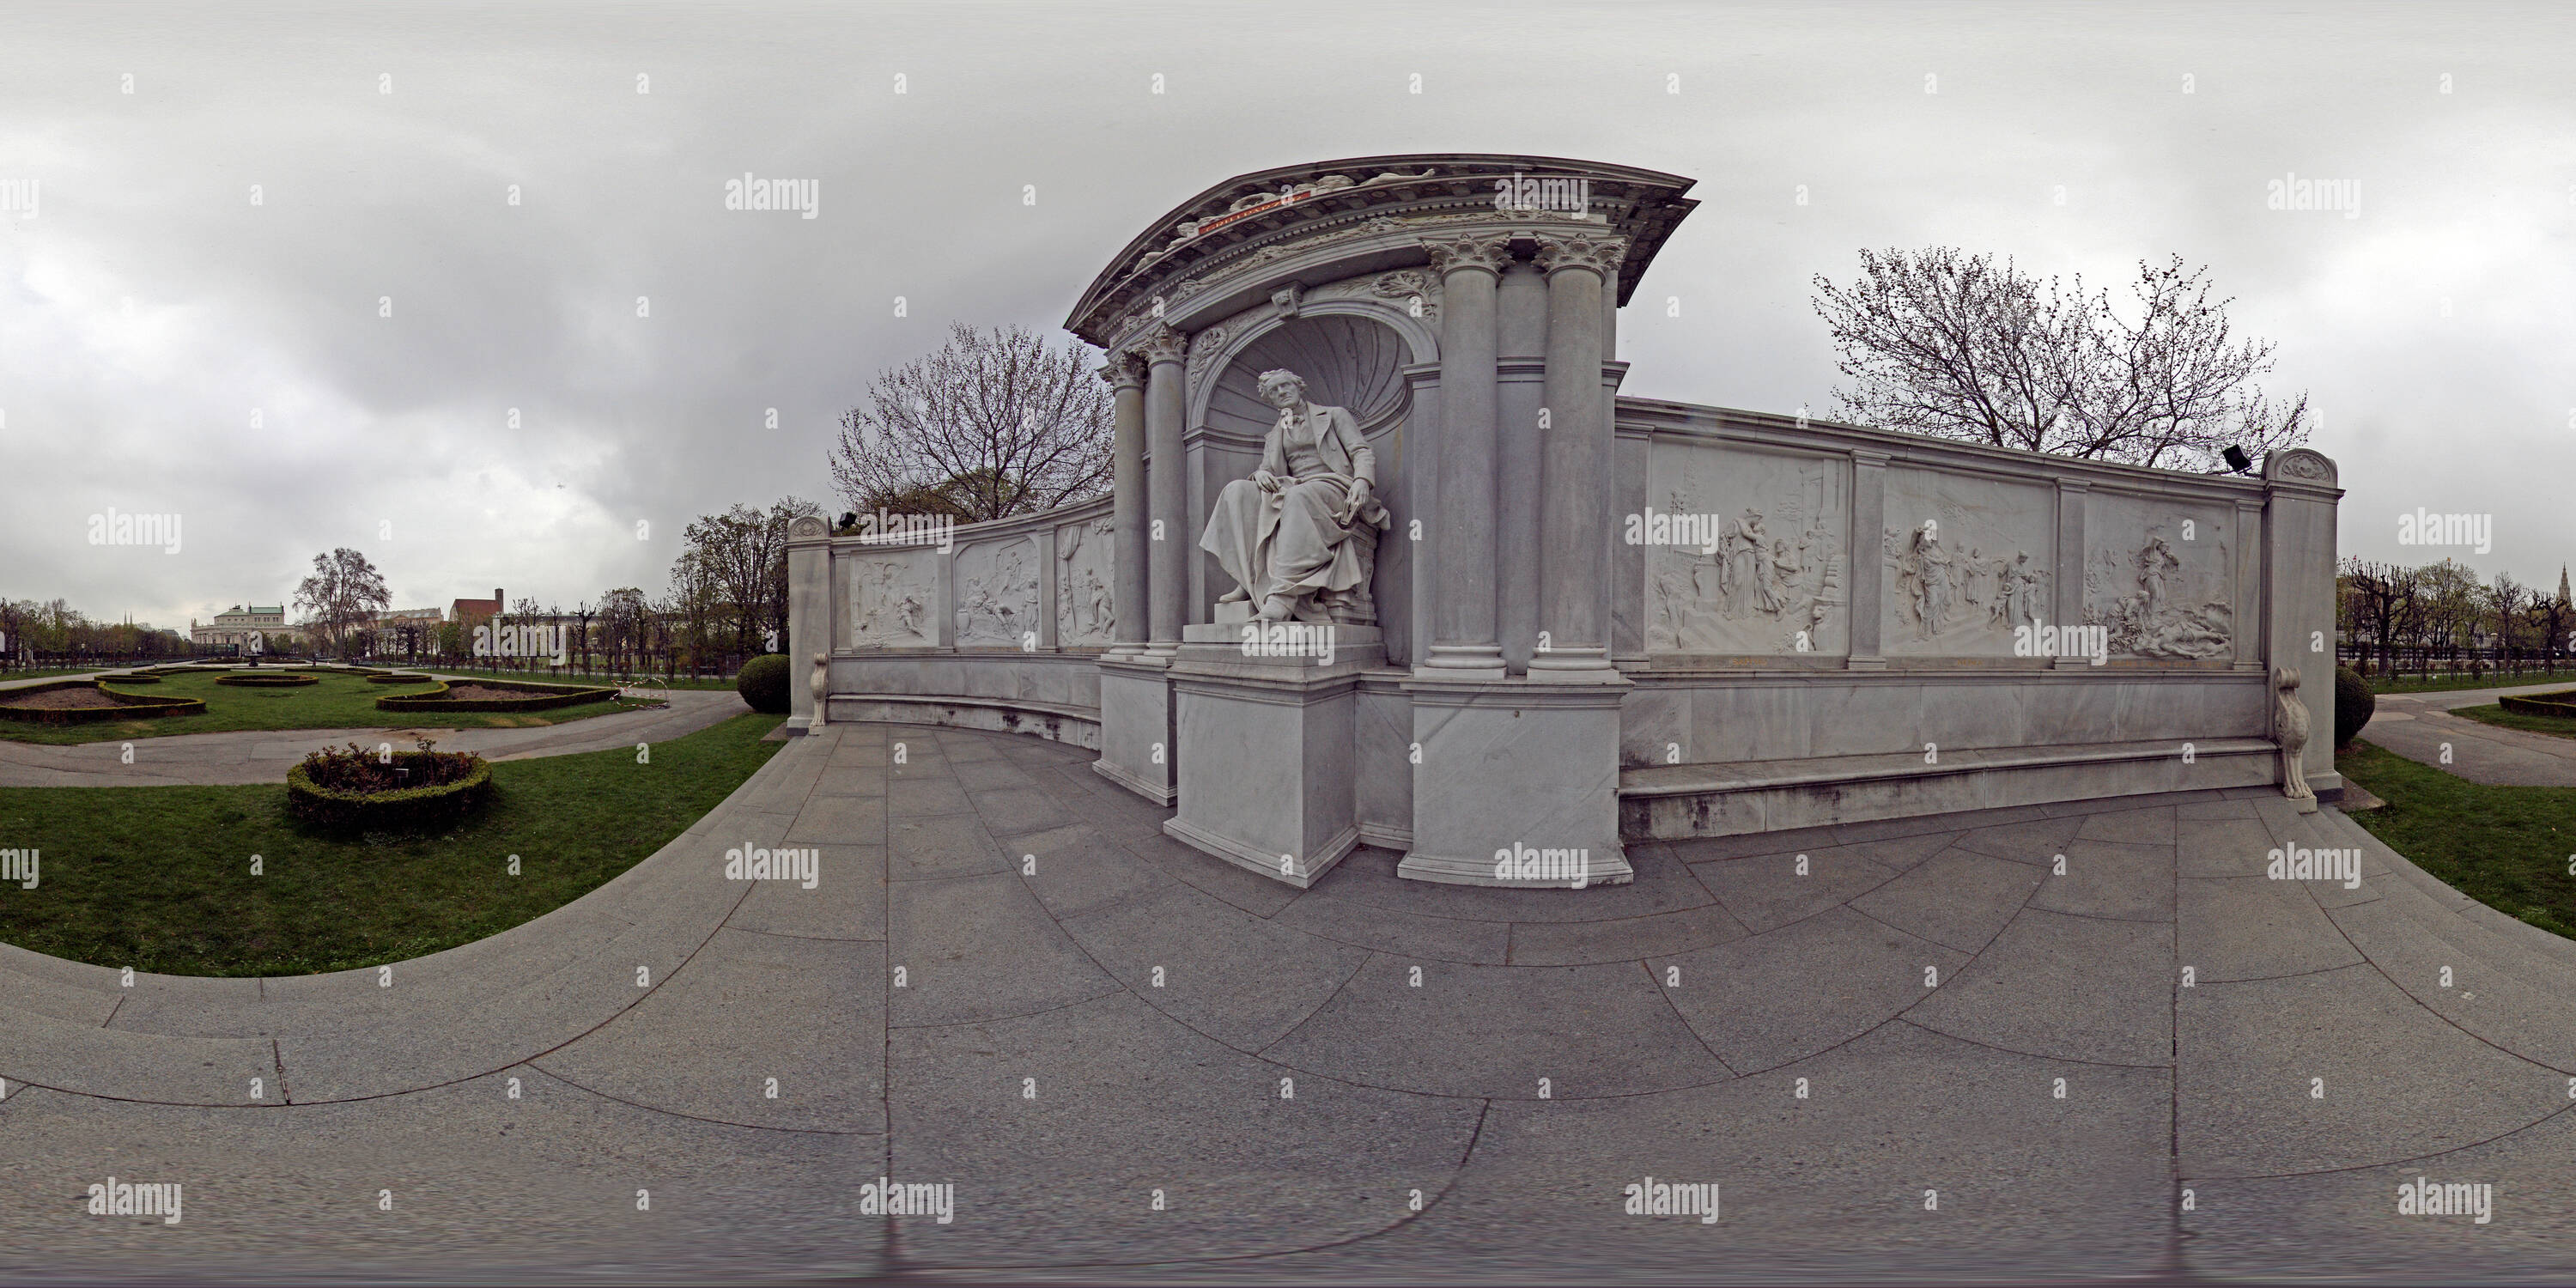 360 degree panoramic view of Franz Grillparzer Monument in the Volksgarten